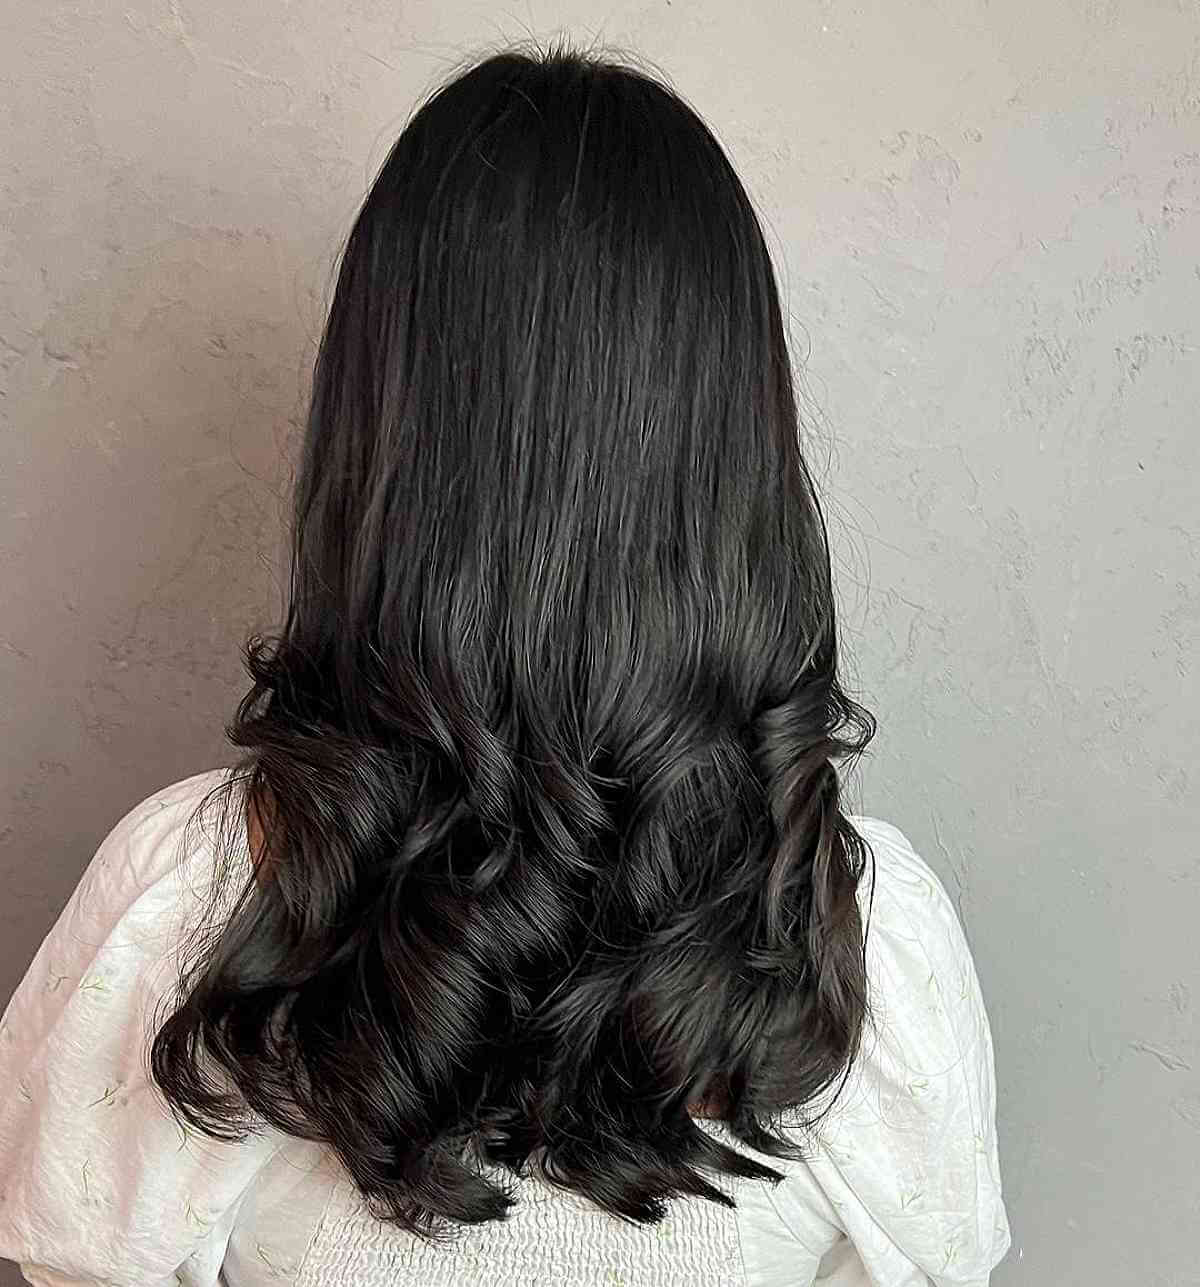 Mid Back-Length Black Hair with Soft Permed Curls